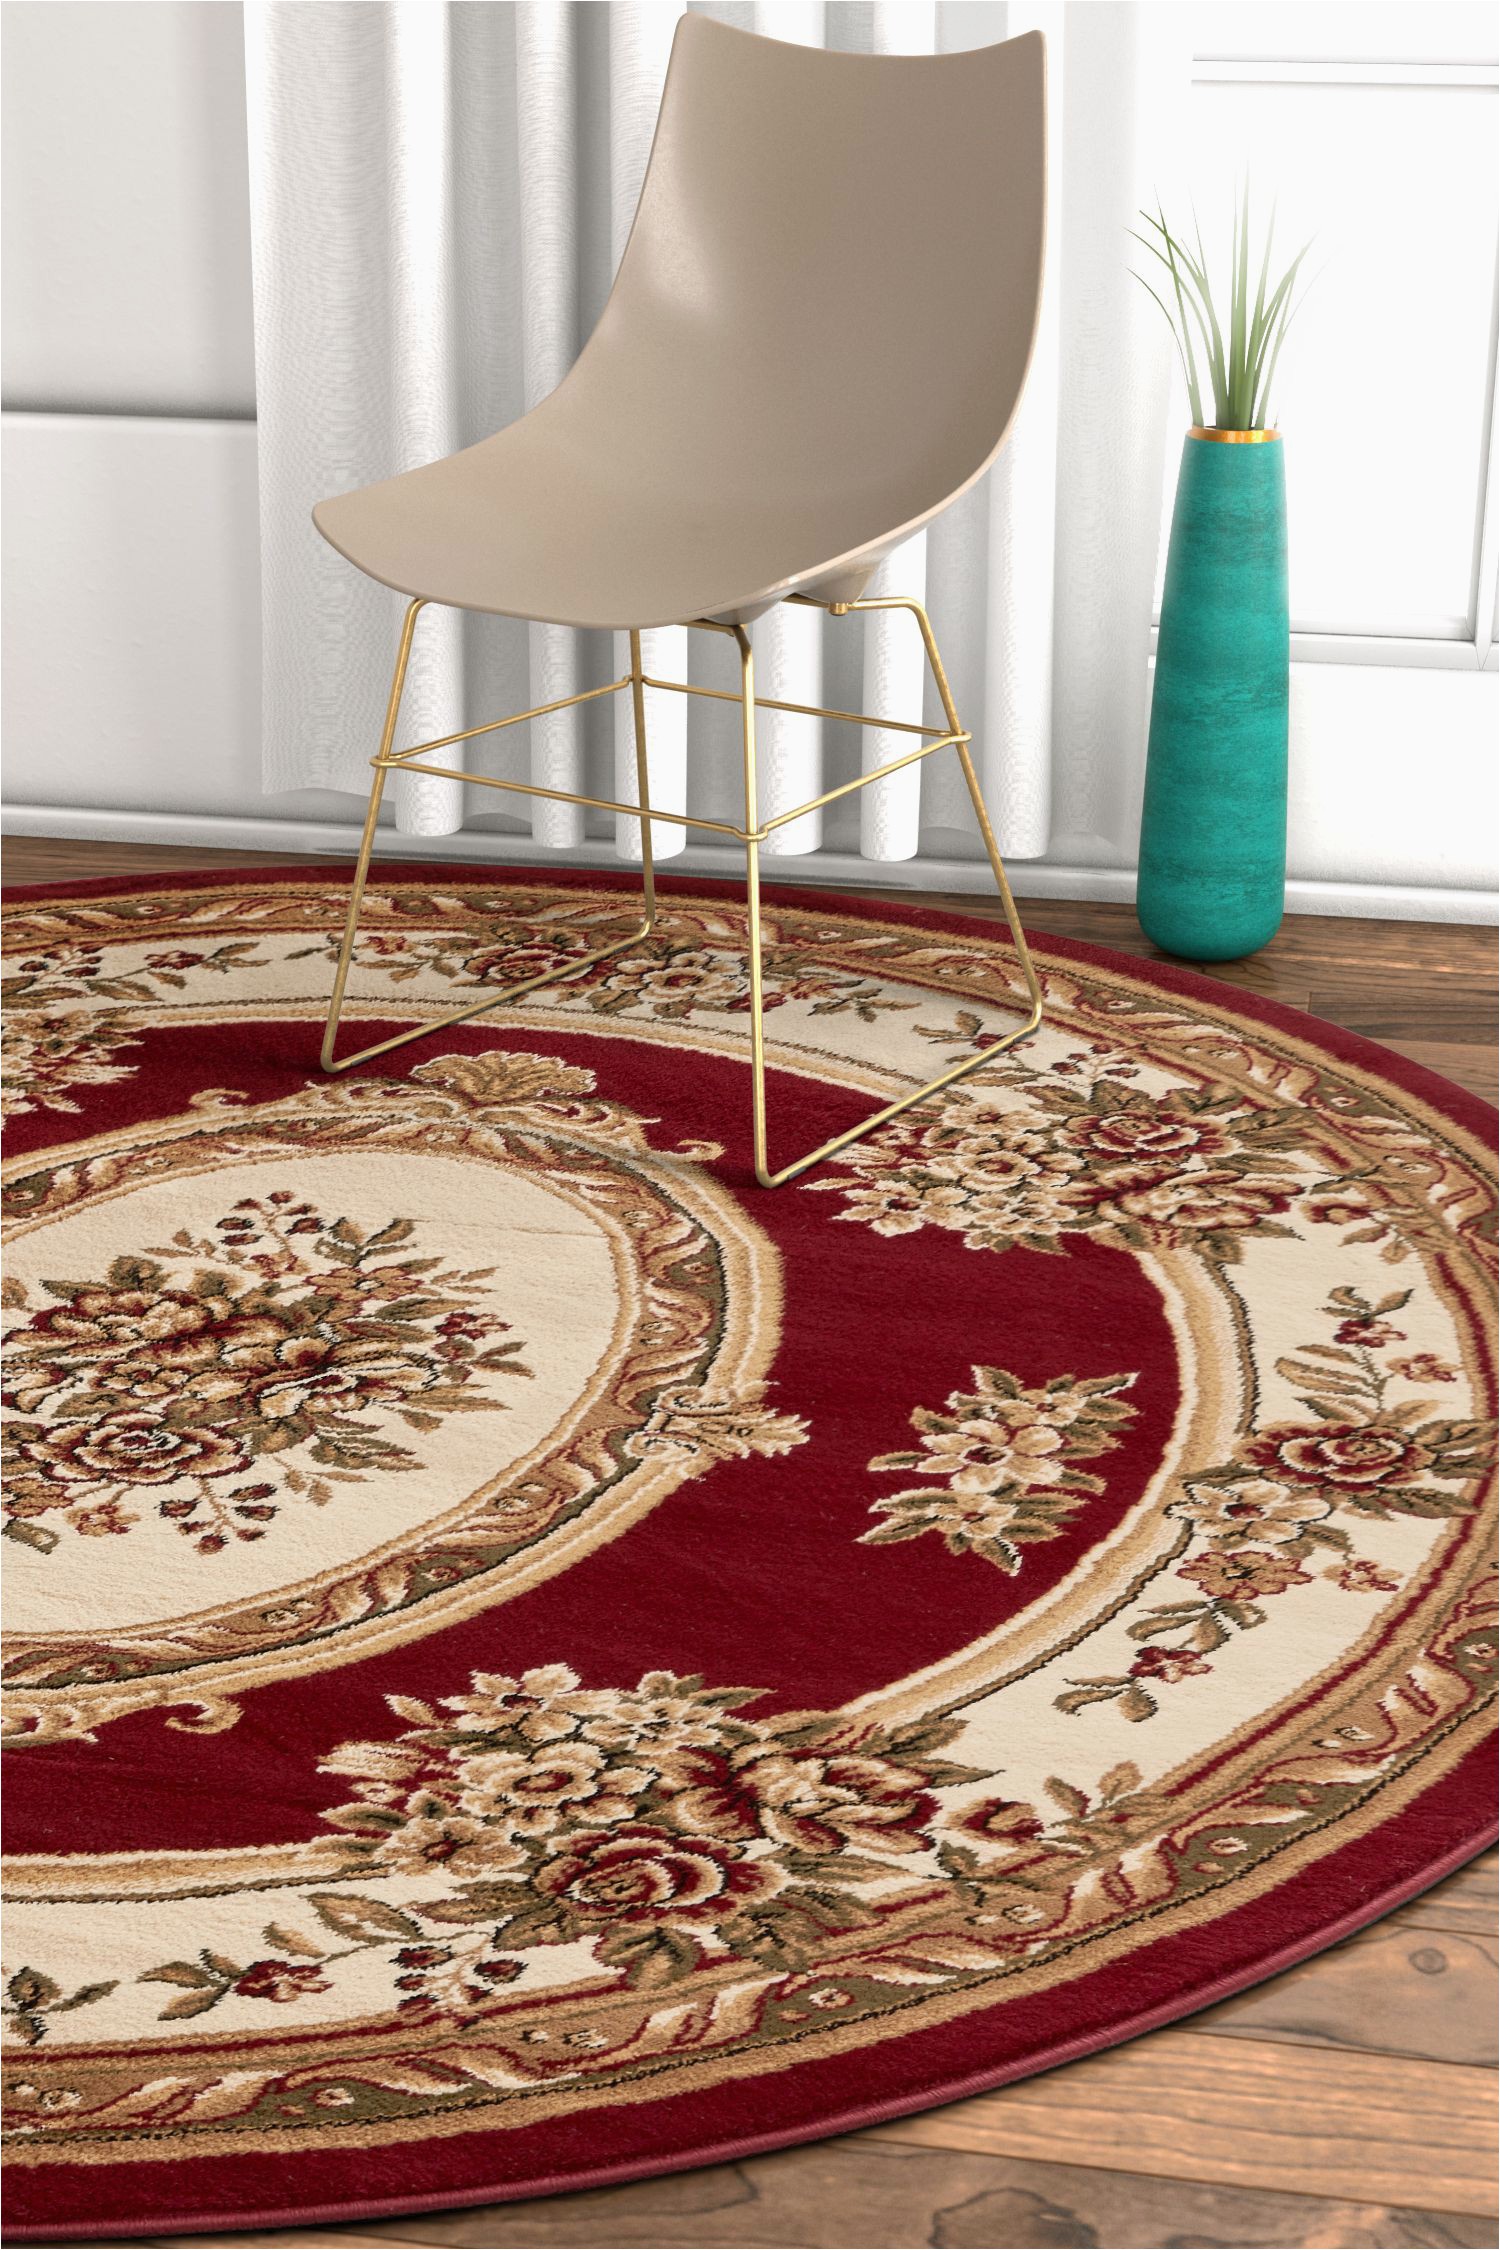 Kohls area Rugs In Store Well Woven Timeless Le Petit Palais Traditional Medallion